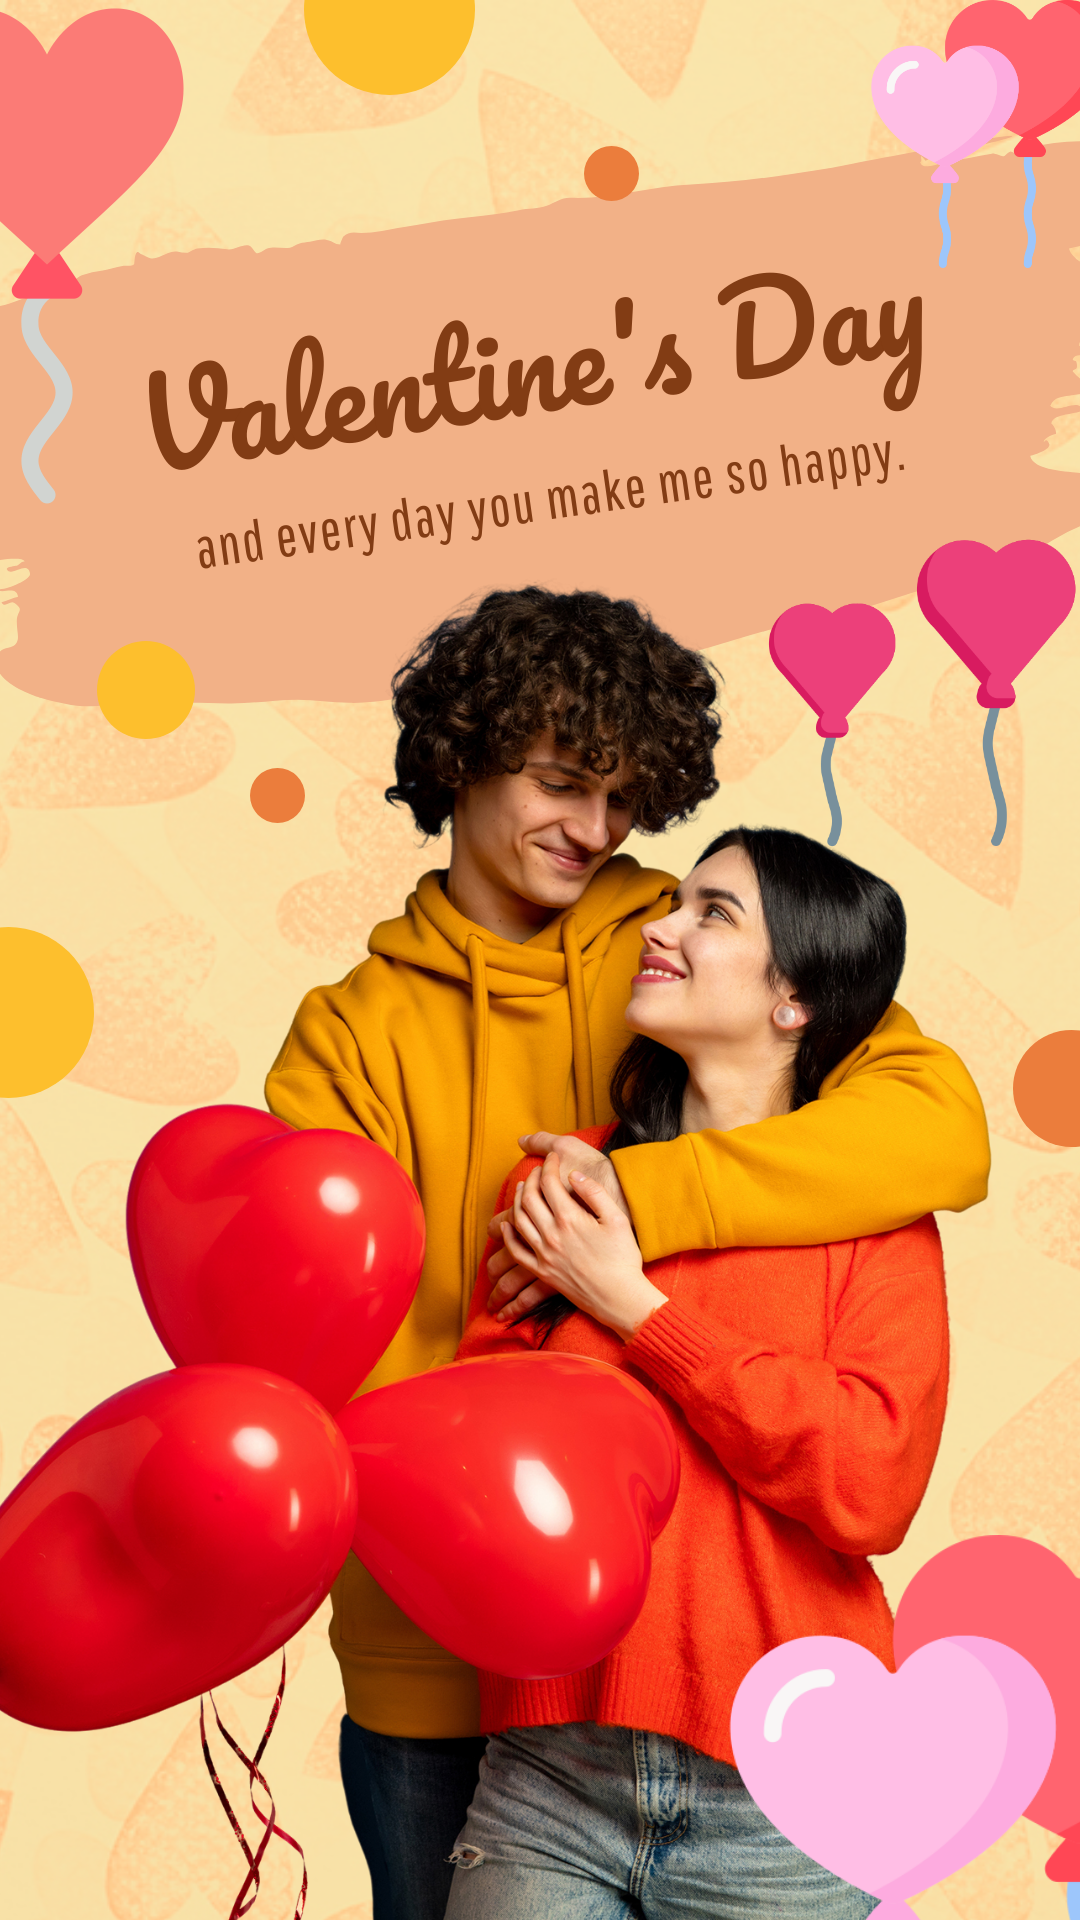 valentines day - cool IG story idea